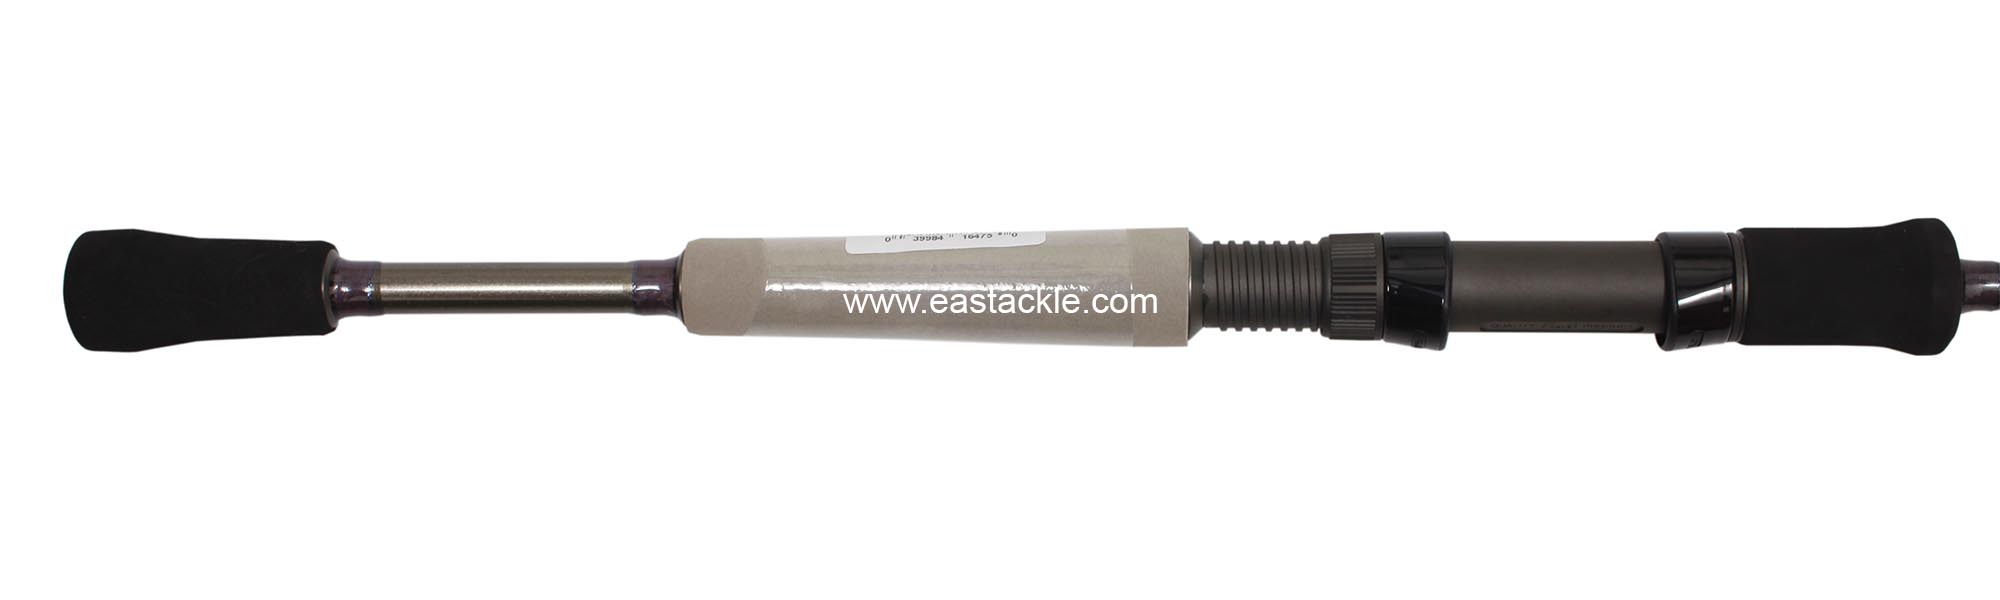 Storm - Adventure - AVS662ULF - Spinning Rod - Handle Section (Side View) | Eastackle